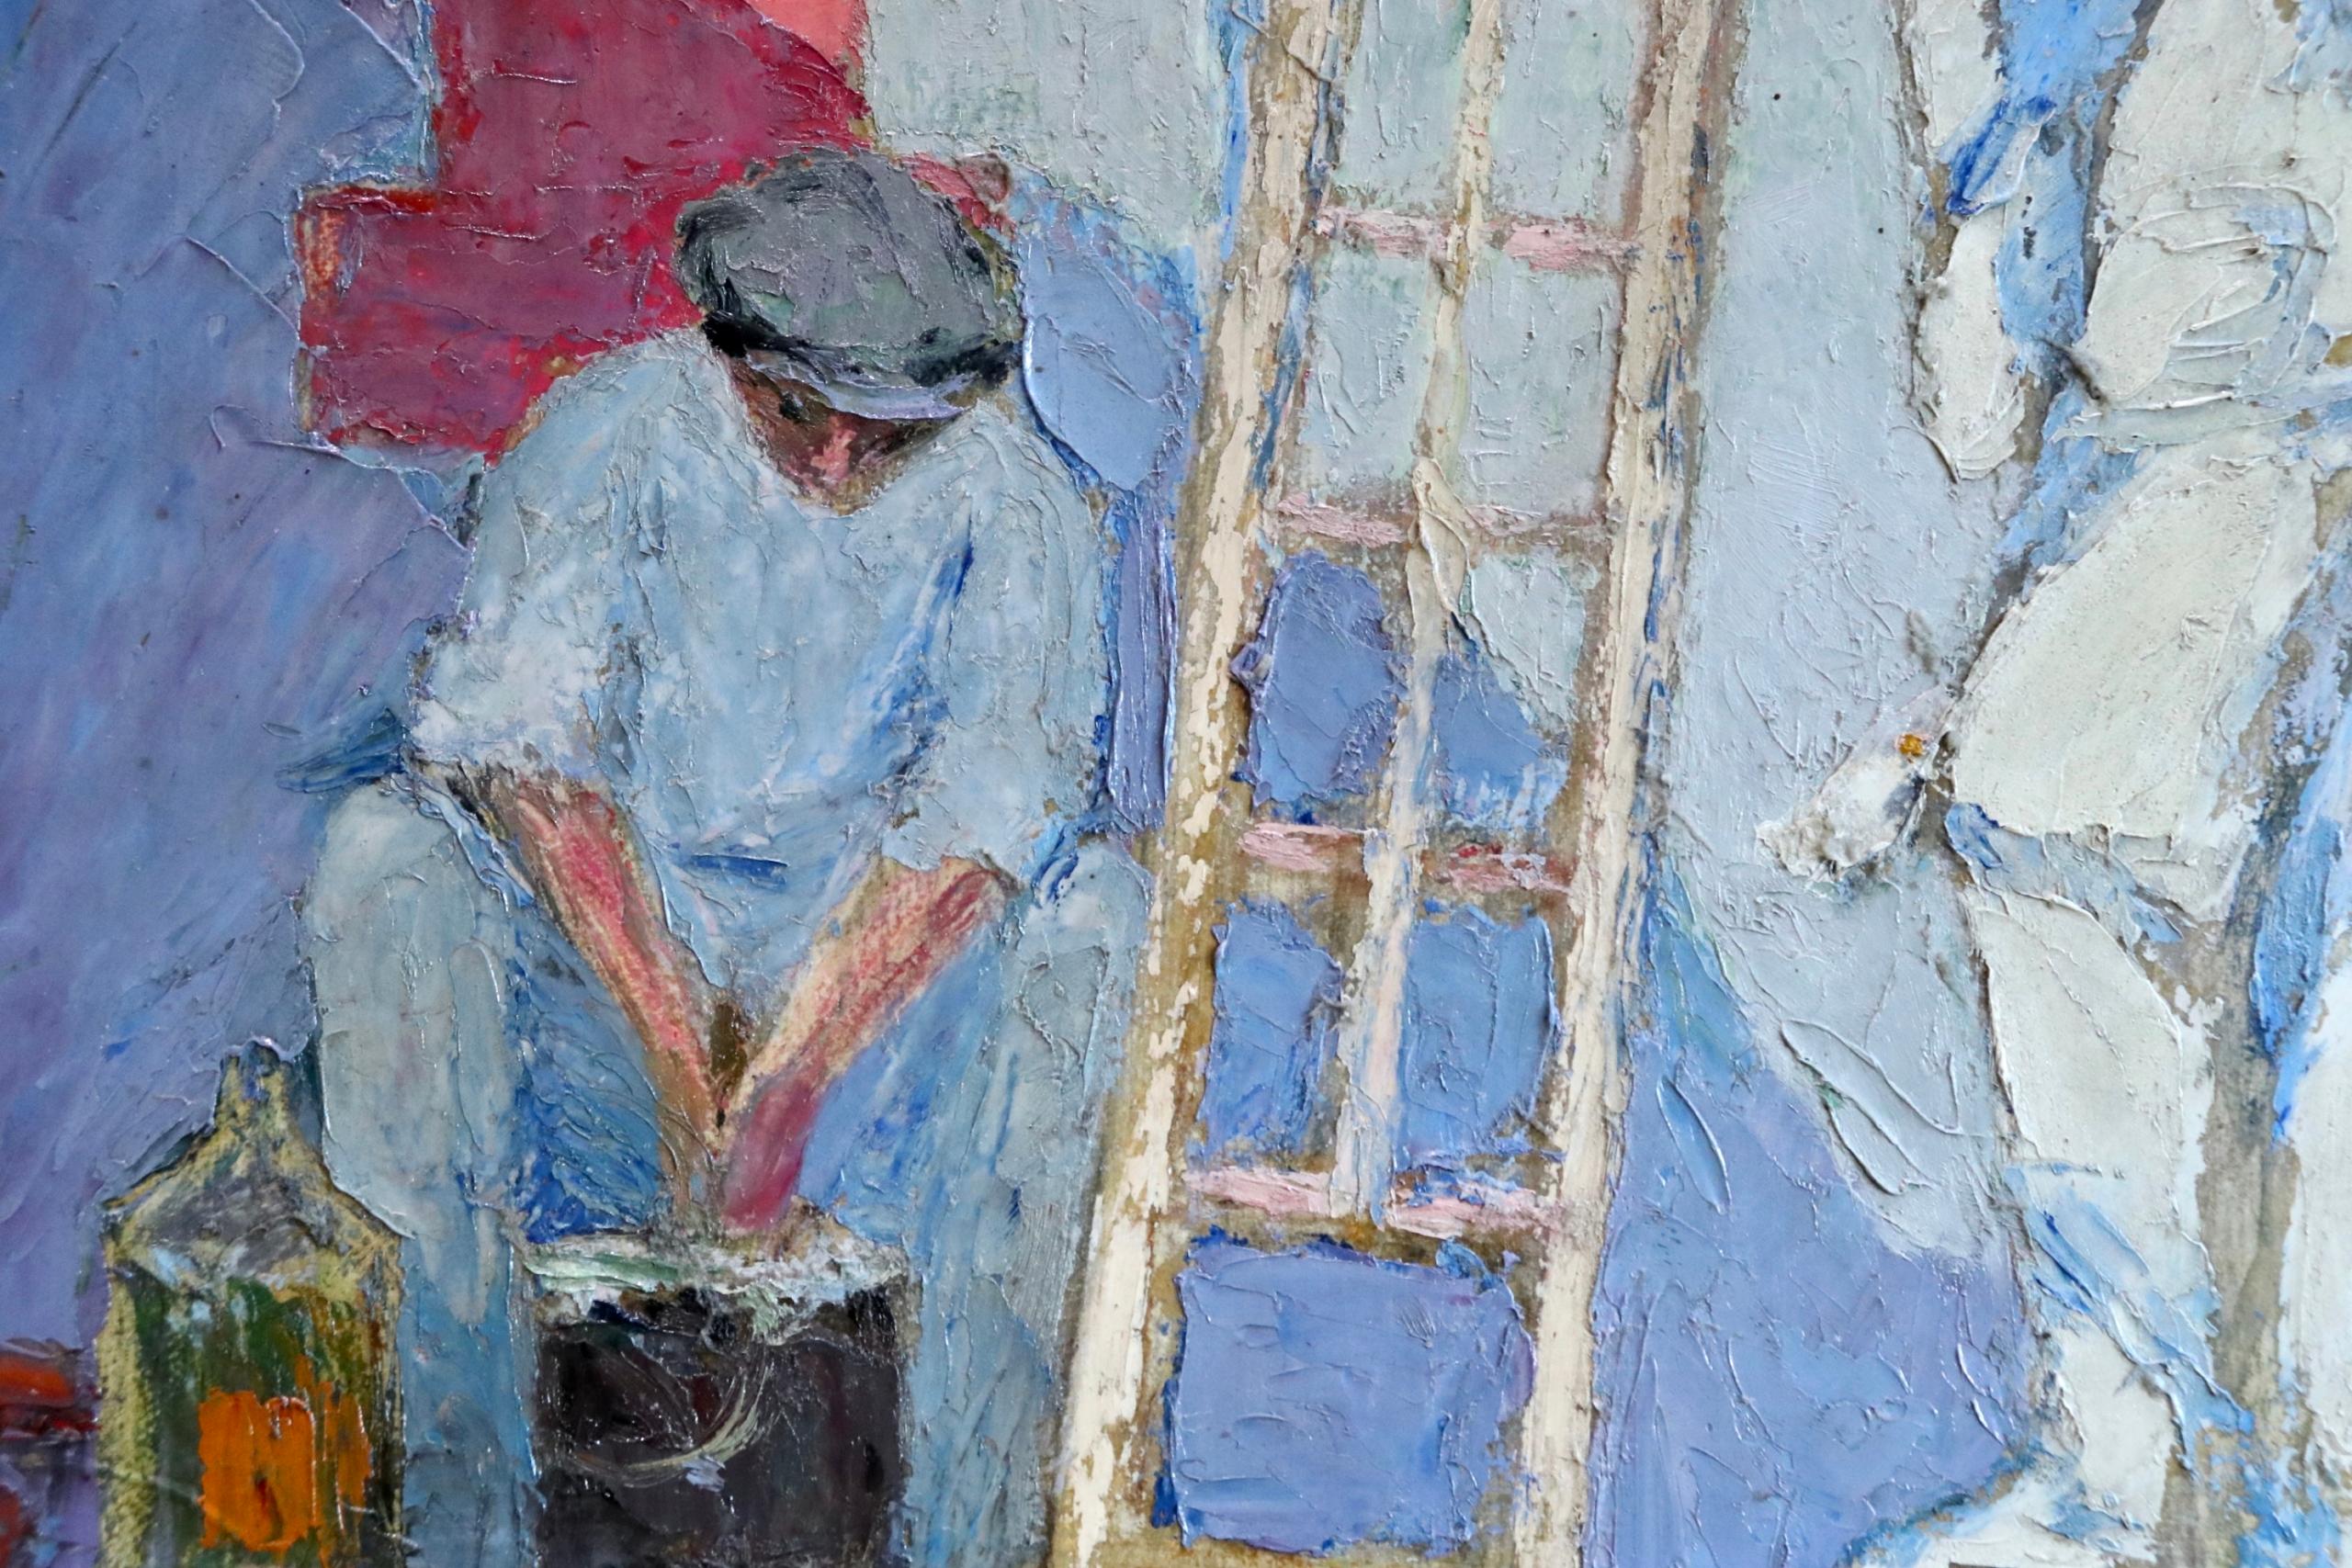 Oil on board by Italian post impressionist painter Bernardo Biancale depicting two men painting the outside of house - one prepares the paint while the other holds the ladder. The piece is beautifully coloured, in particular the blue of the shadows